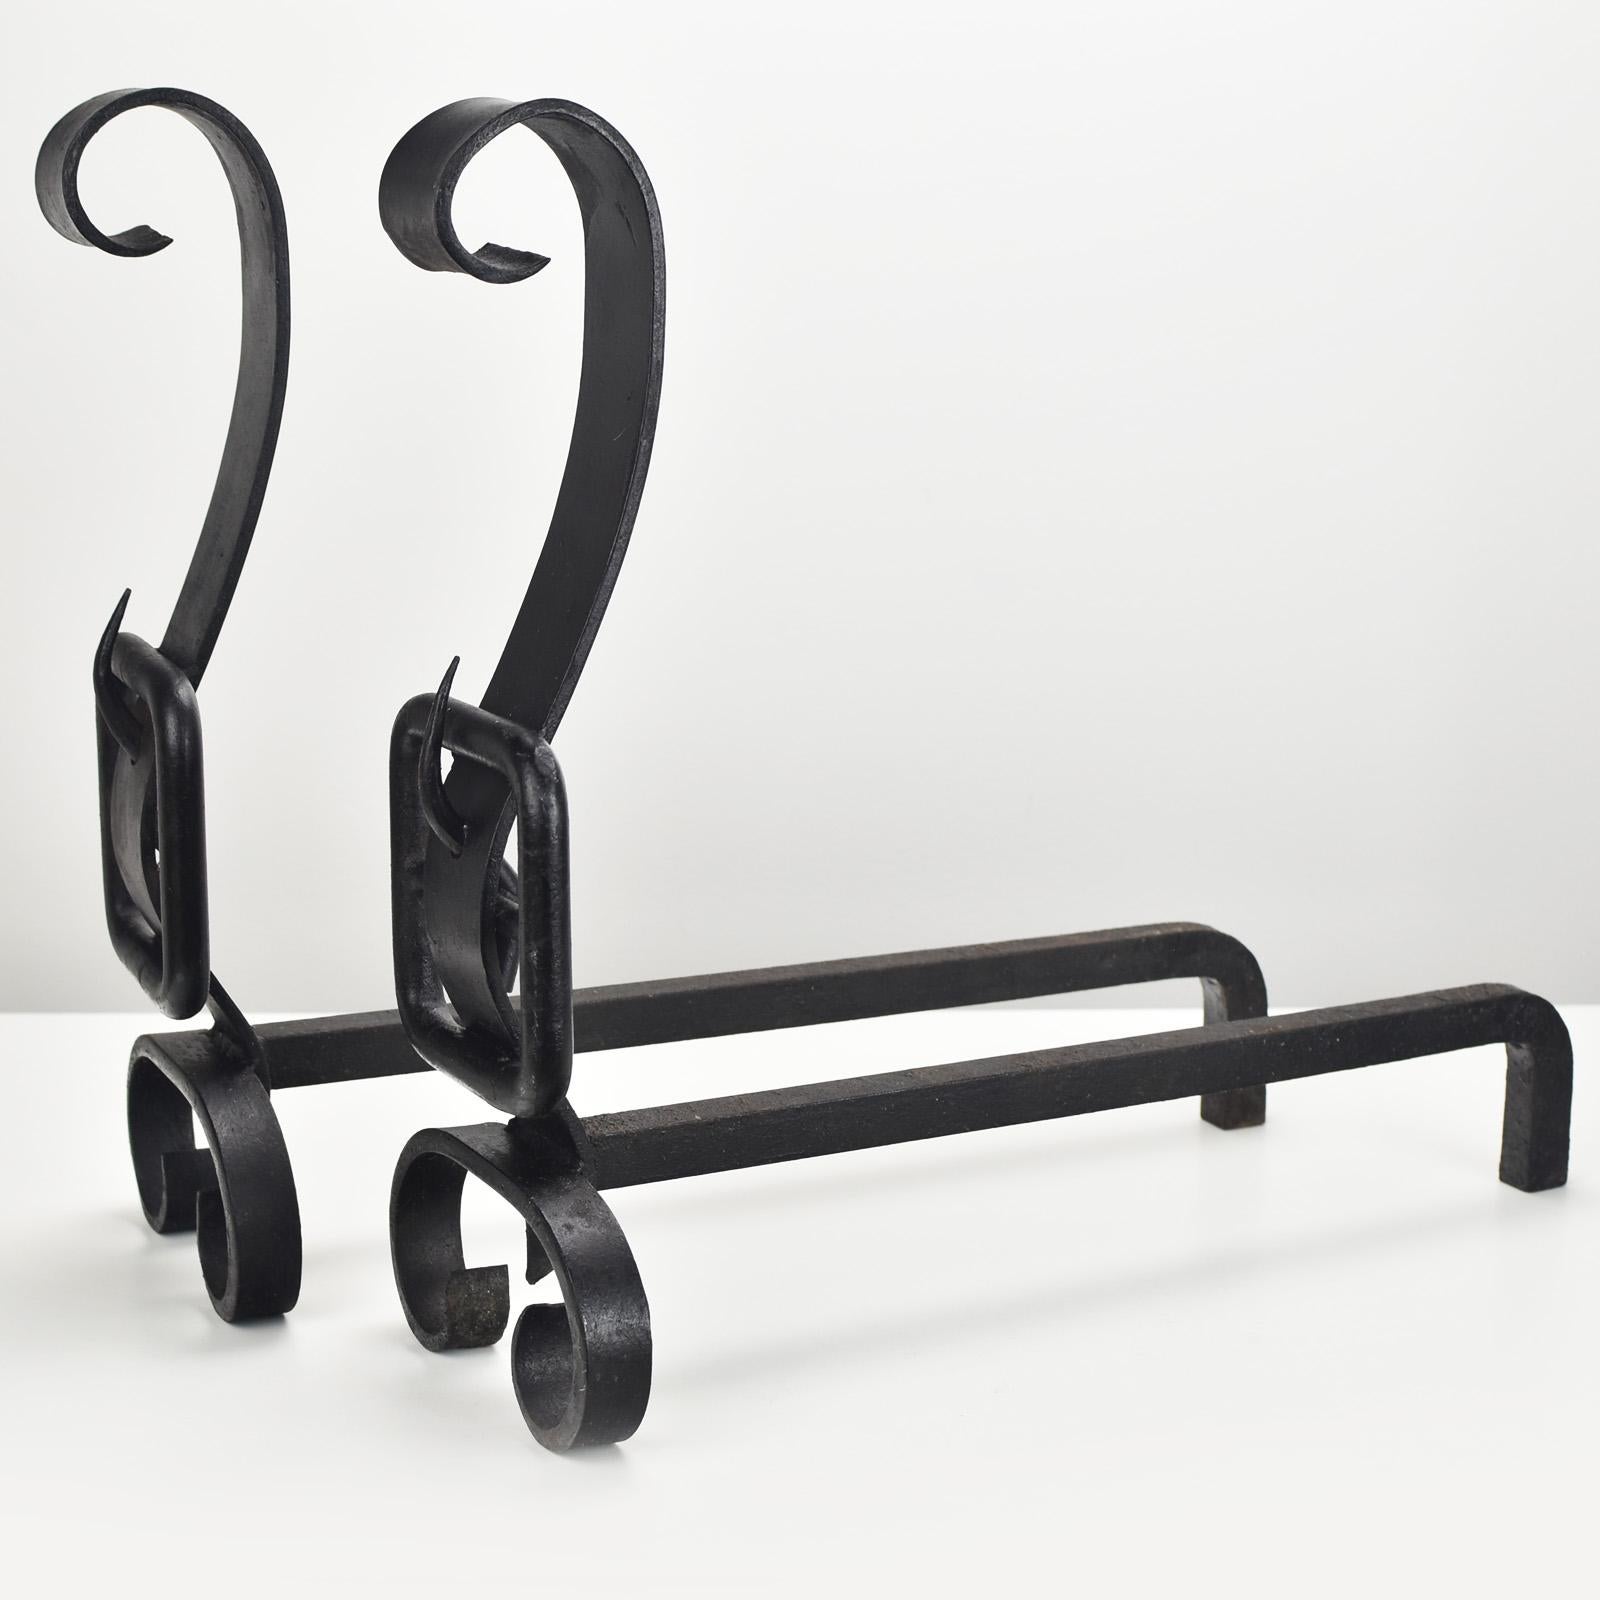 Mid-Century Modern Pair of Wrought Iron Andirons Firedogs France ca. 1950s Jacques Adnet Style For Sale